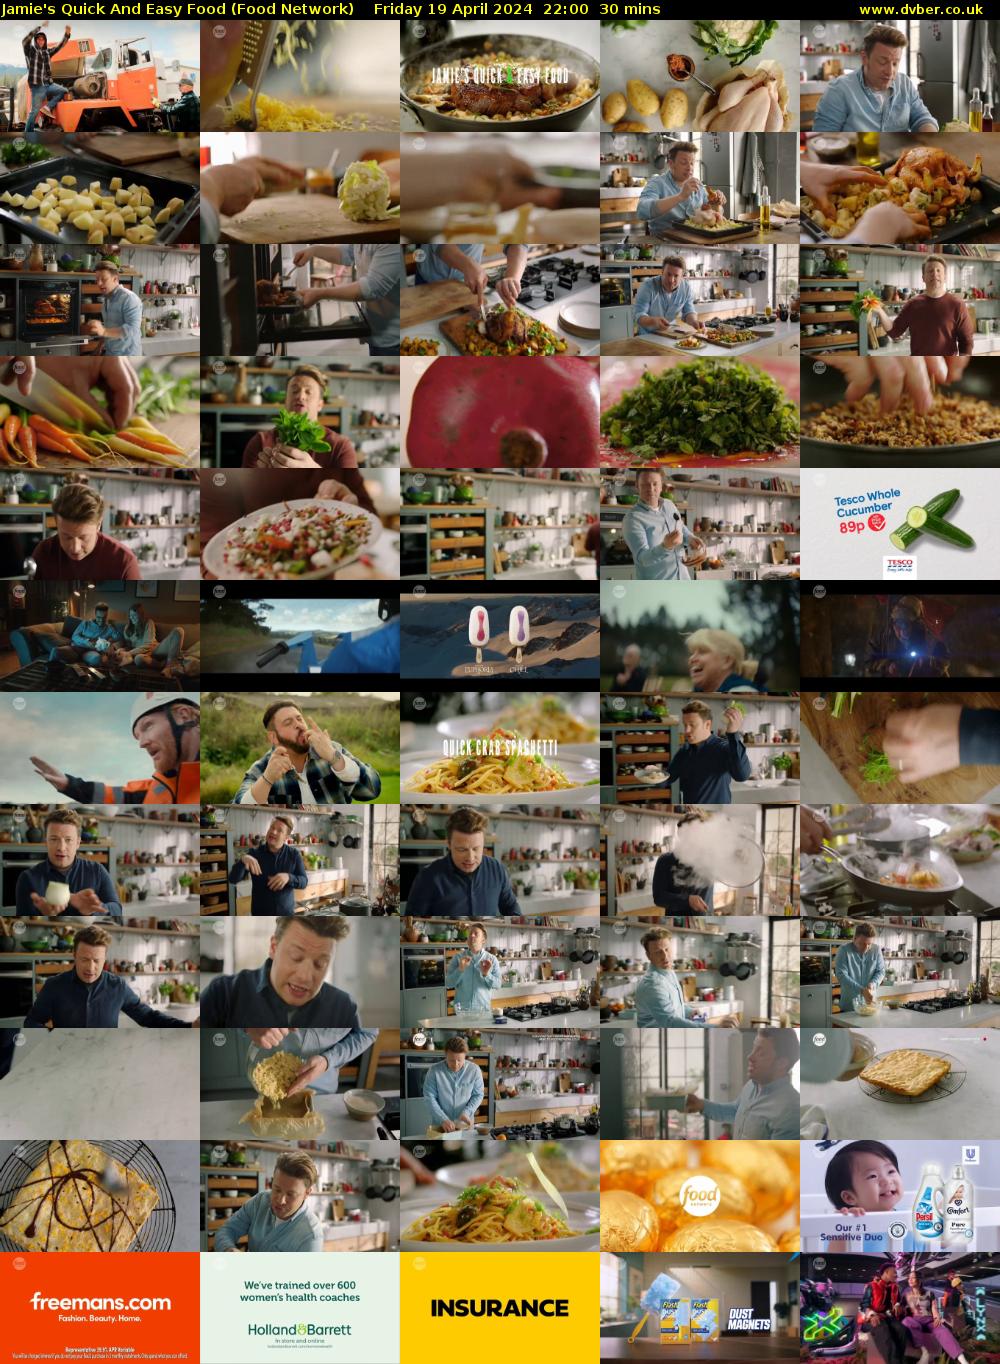 Jamie's Quick And Easy Food (Food Network) Friday 19 April 2024 22:00 - 22:30